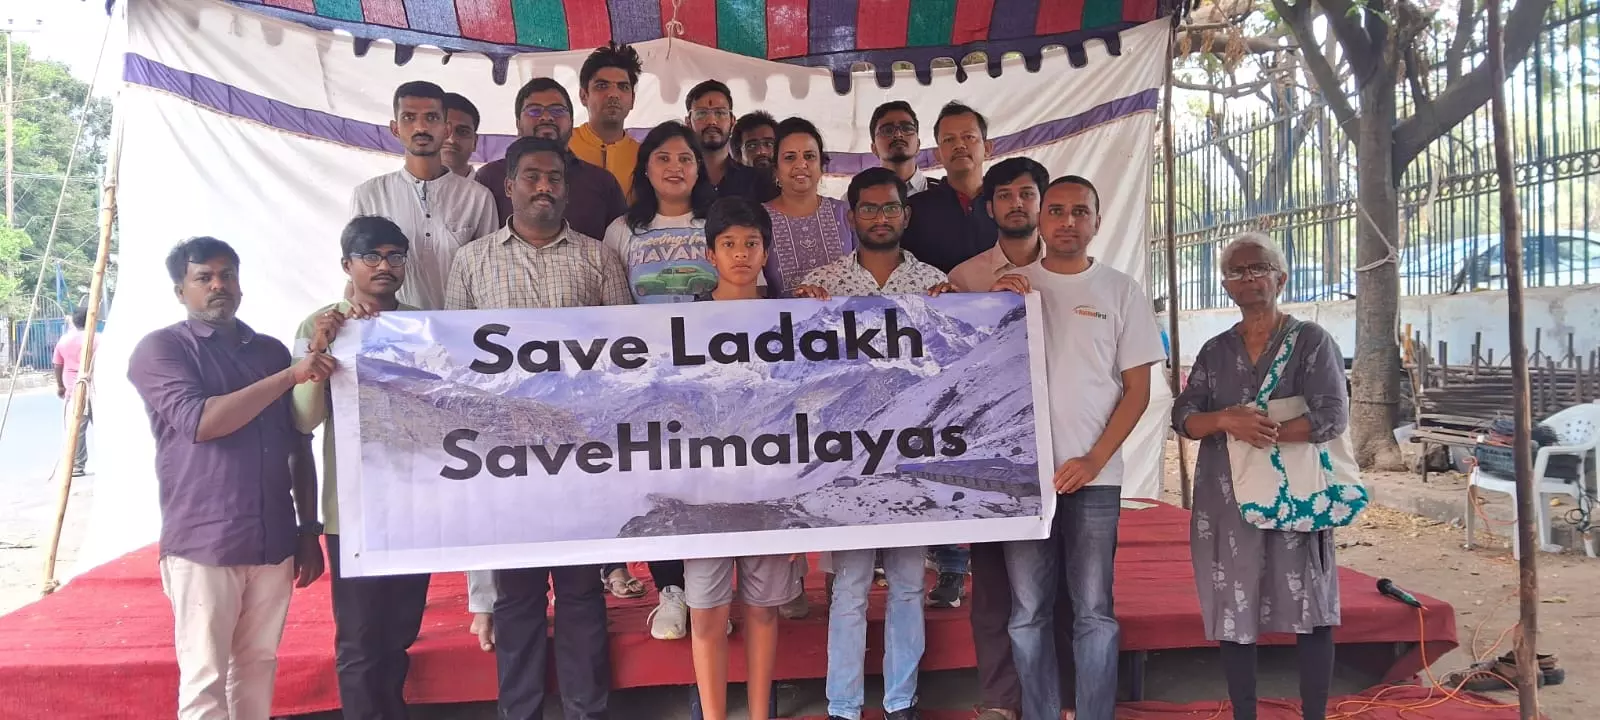 Hyderabadis Climate Fast in Solidarity with Ladakhi Cause